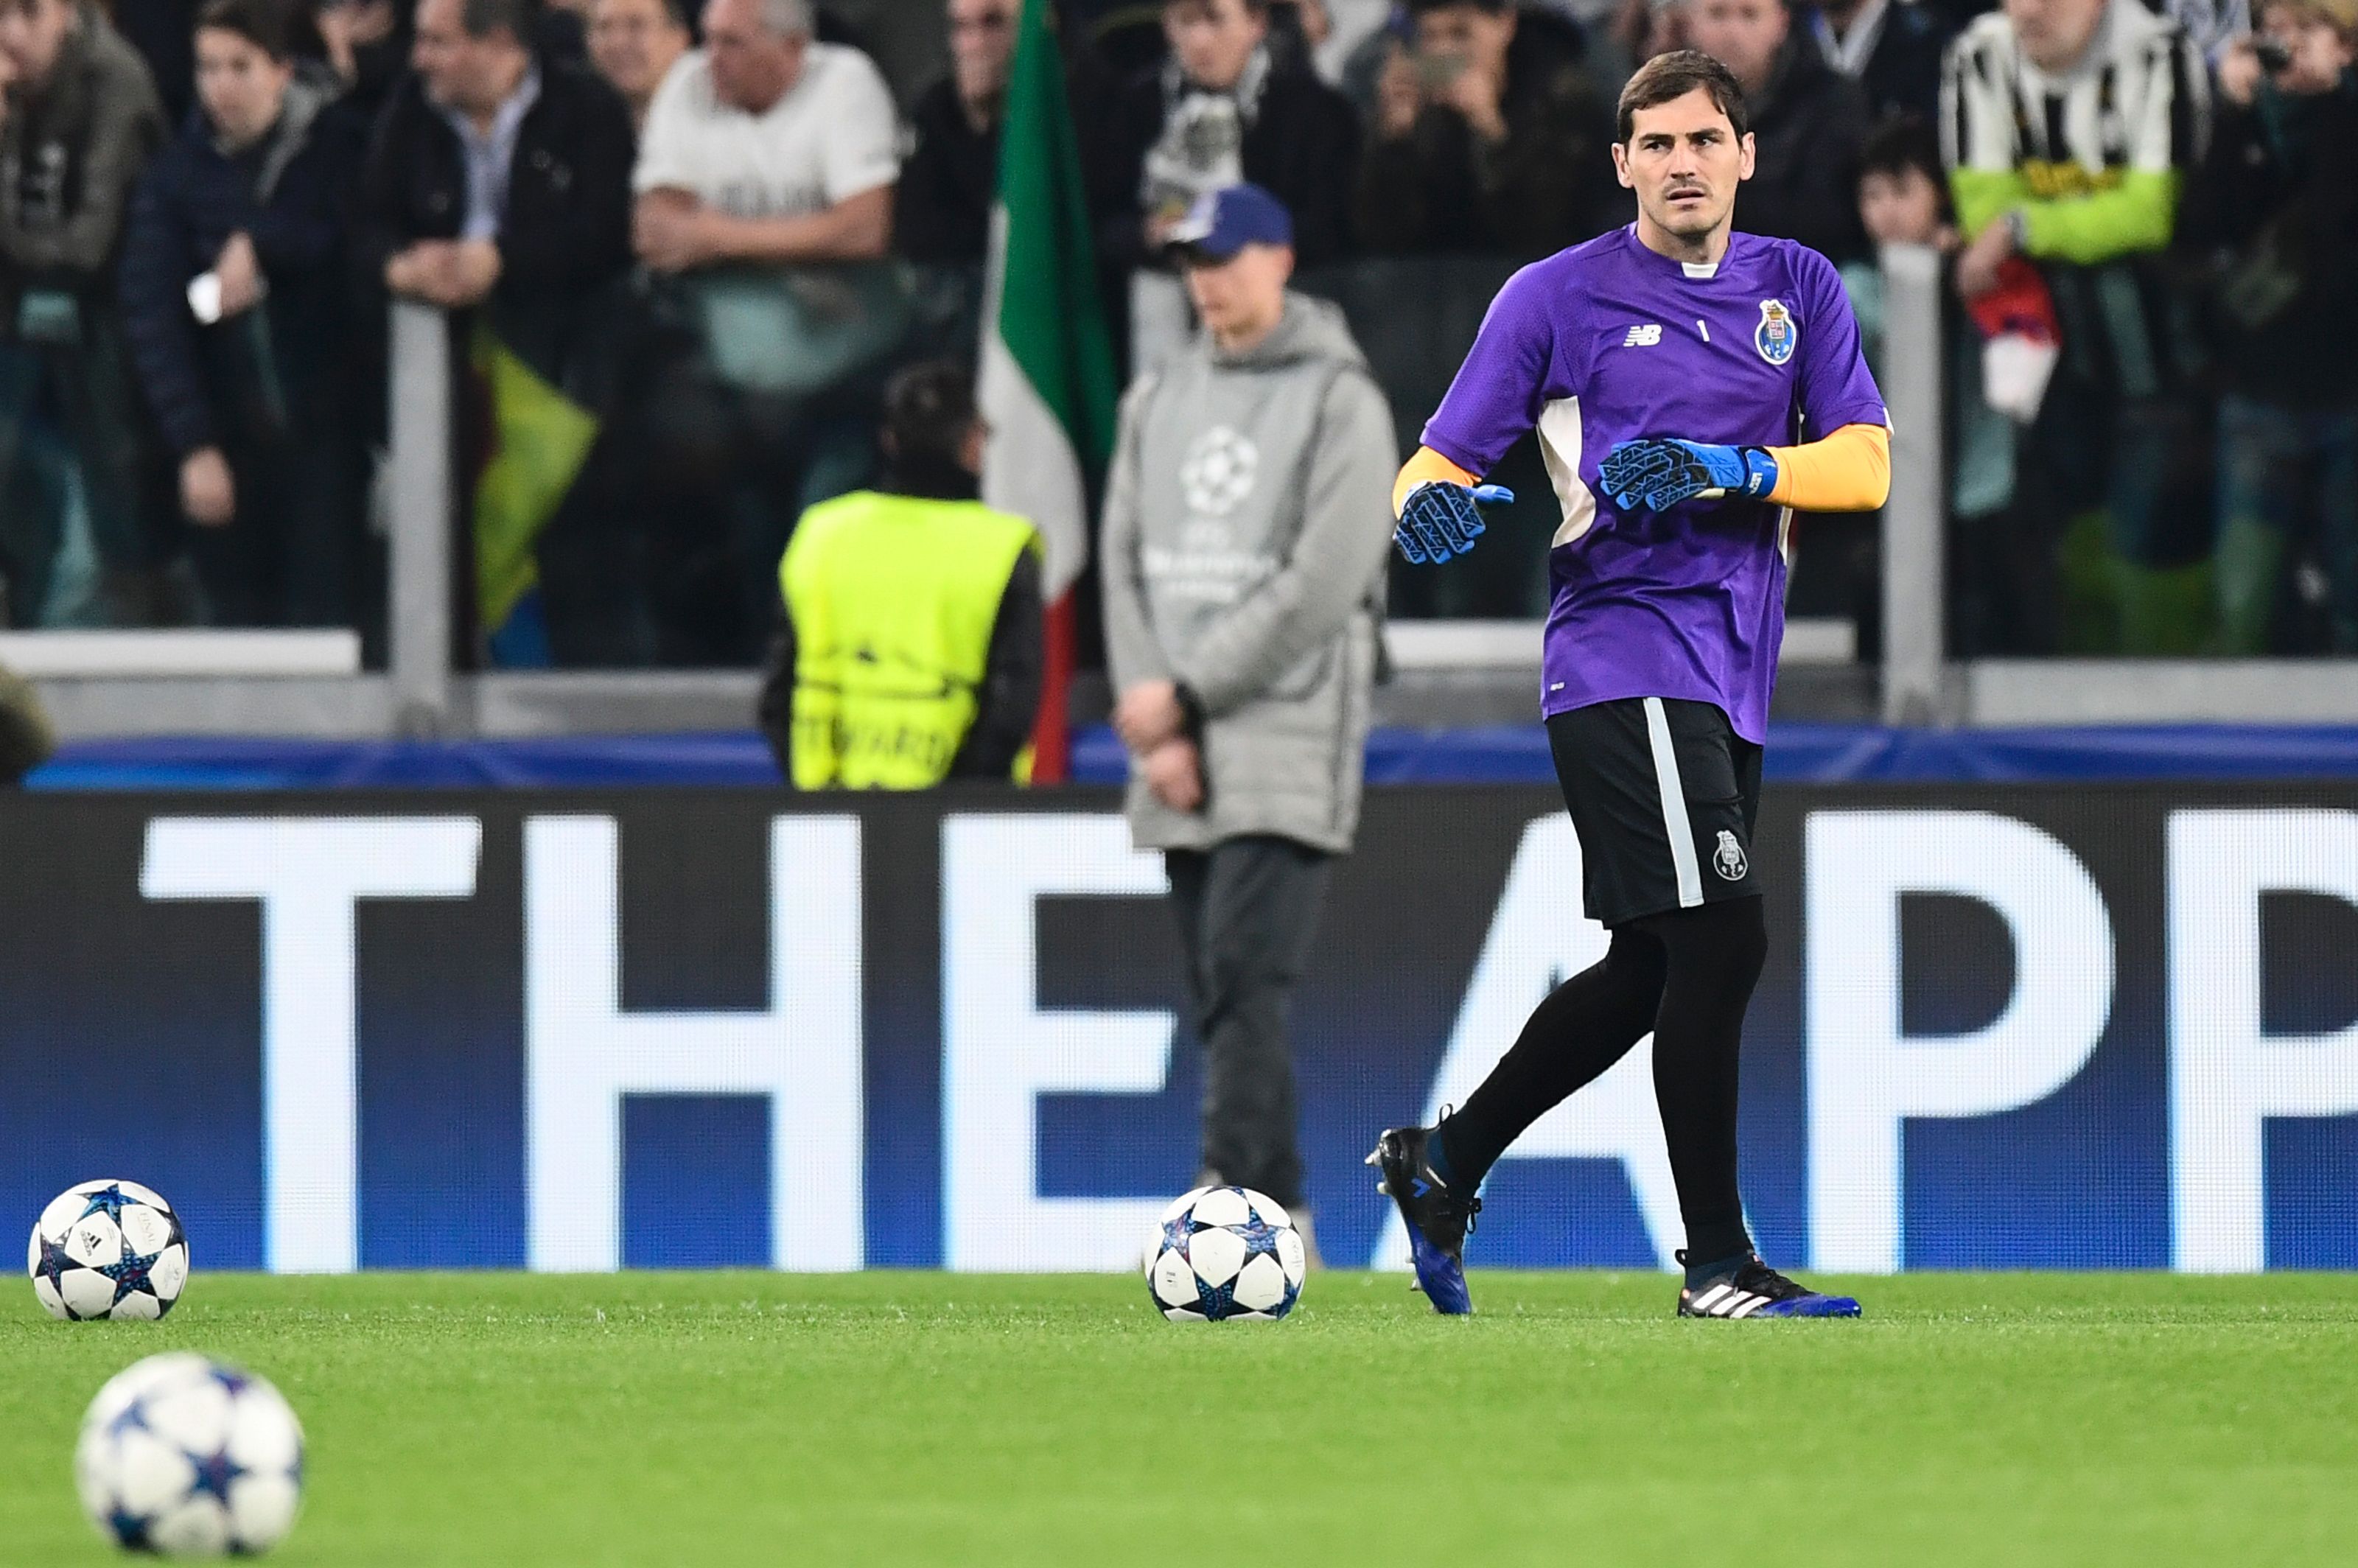 Porto's Spanish goalkeeper Iker Casillas warms up before the UEFA Champions League football match Juventus vs FC Porto on March 14, 2017 at the Juventus stadium in Turin. / AFP PHOTO / MIGUEL MEDINA        (Photo credit should read MIGUEL MEDINA/AFP/Getty Images)